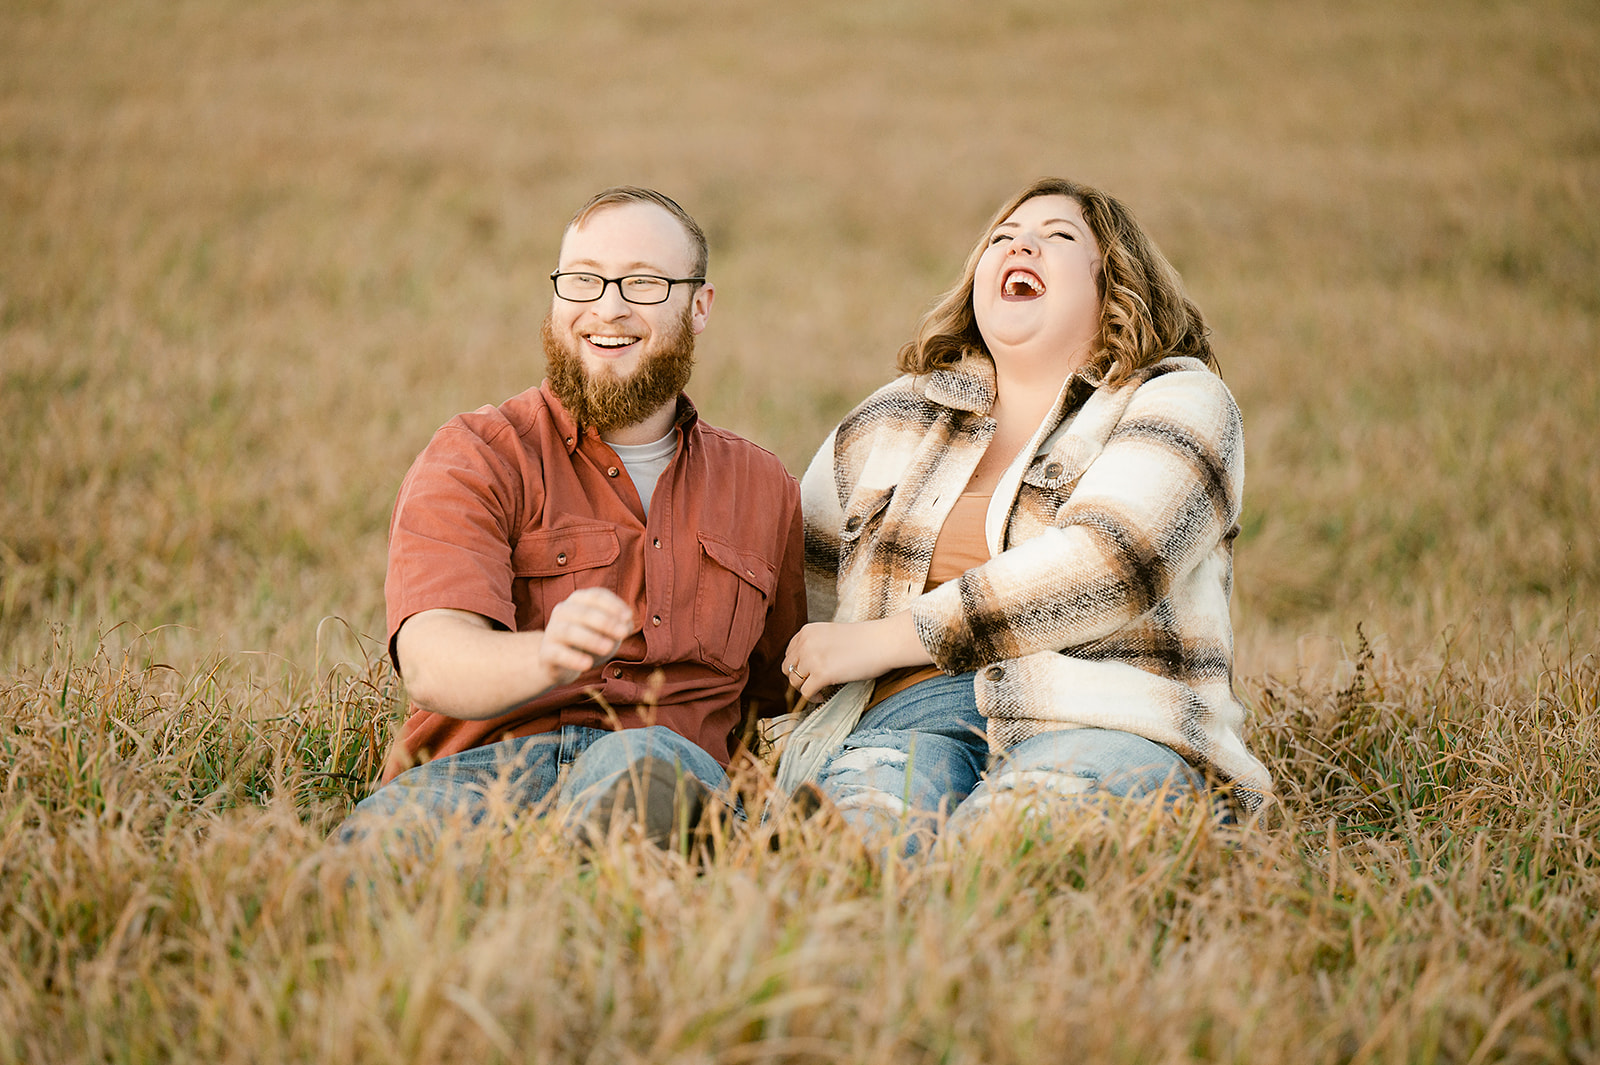 Engagement Sessions | Princeton MN | Nicole Hollenkamp | Couples Photography | Sunset sessions | golden hour